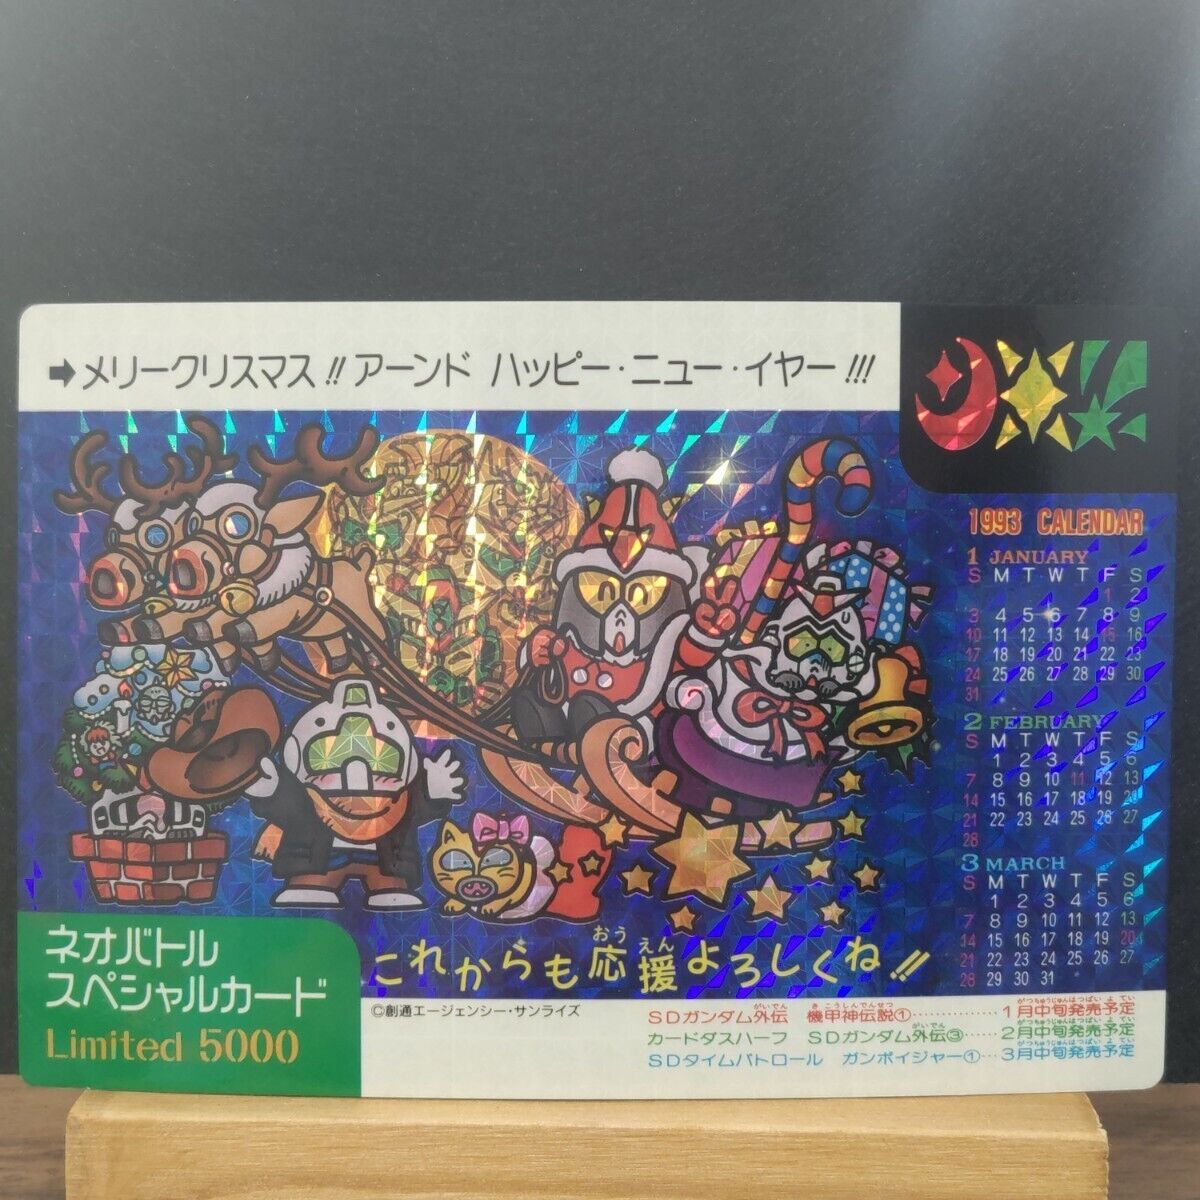 SD Gundam Carddas Neo Battle Special Card Limited 5000 Limited Lottery Christmas